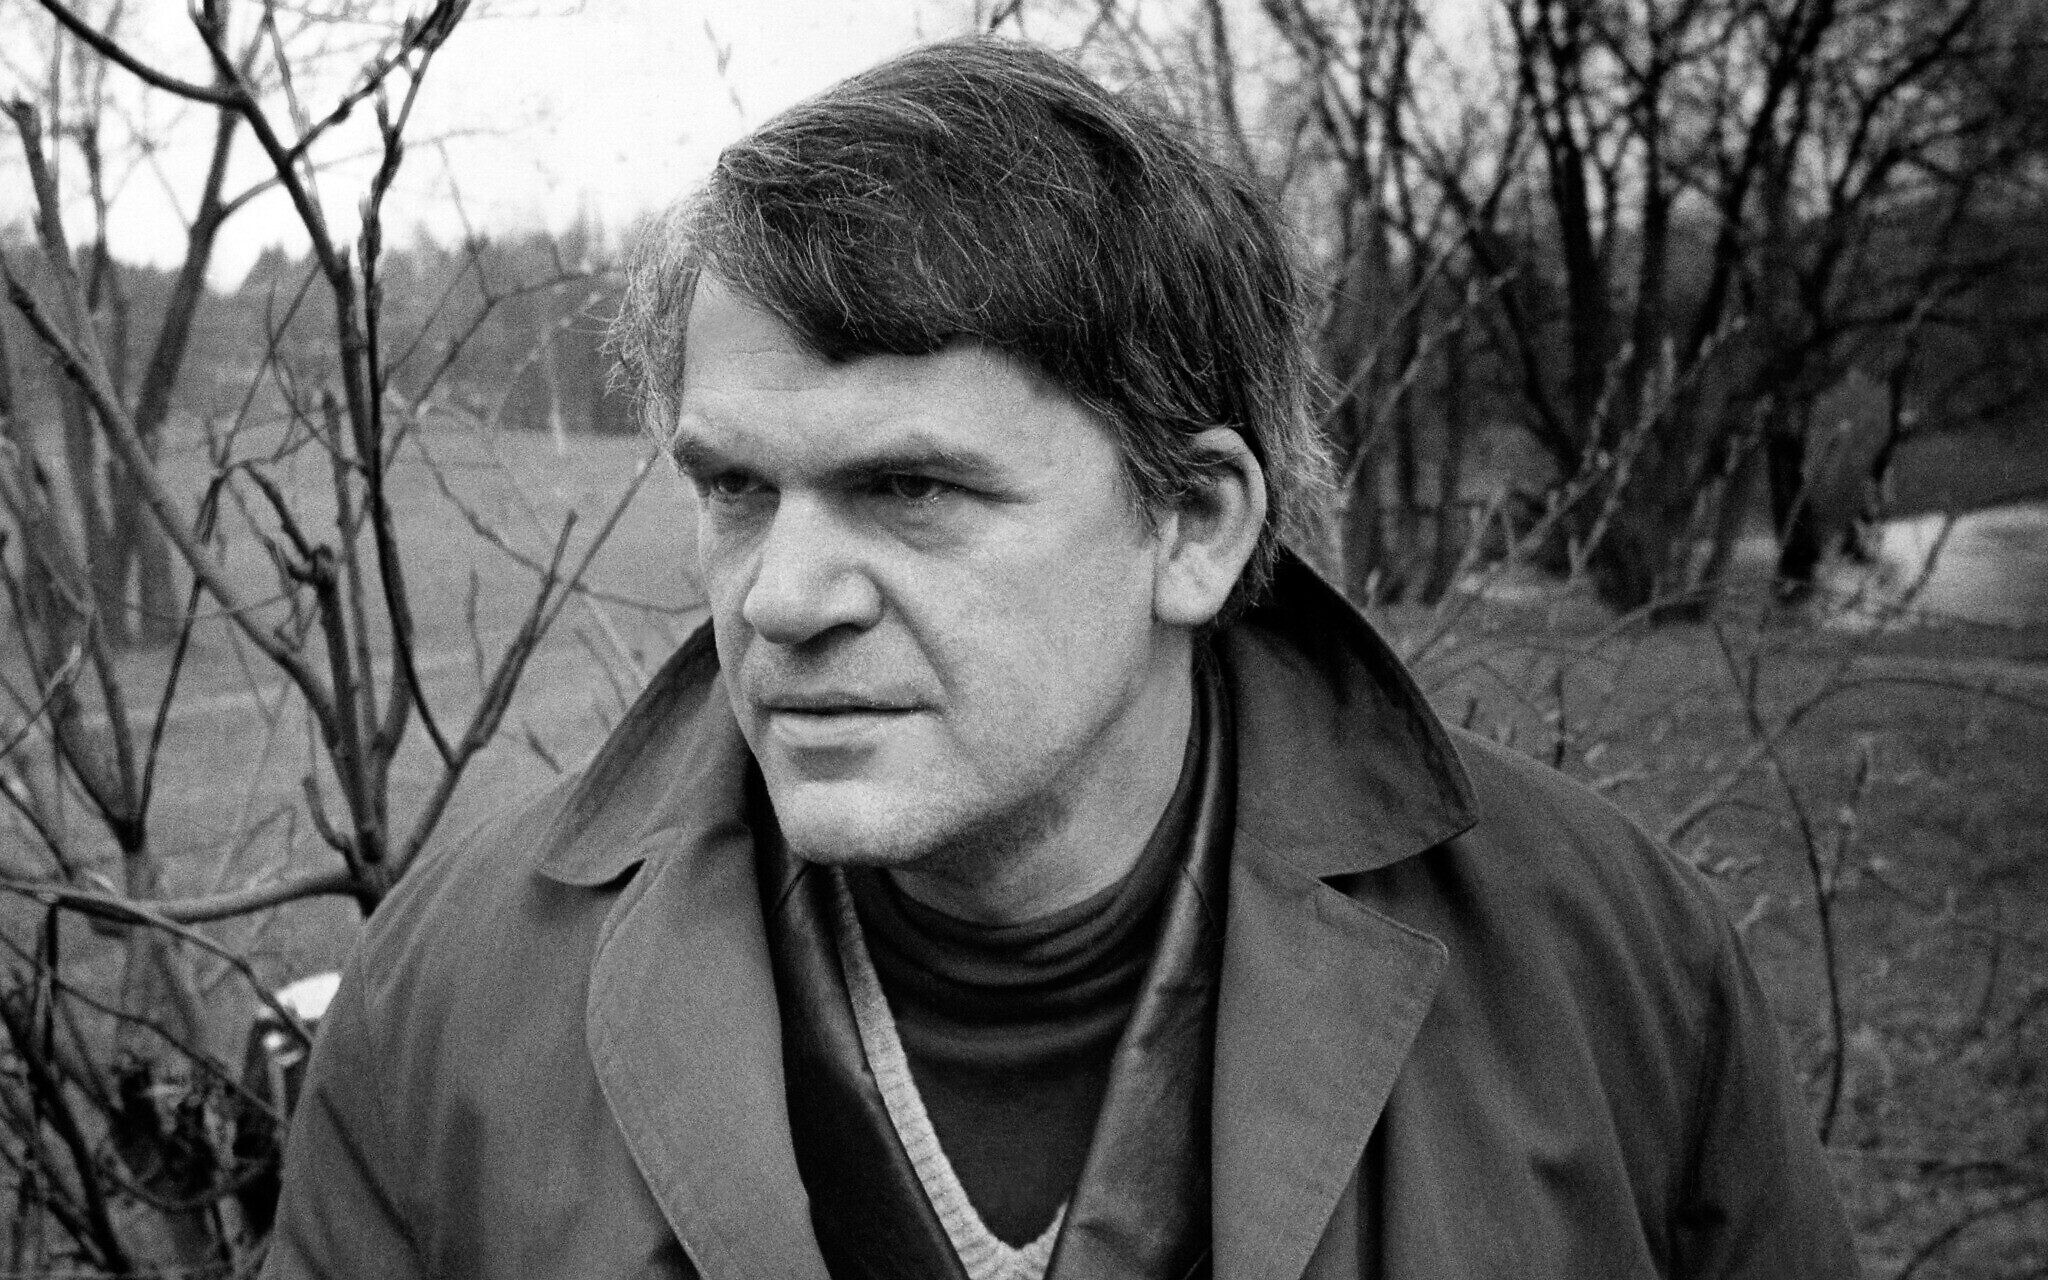 Milan Kundera, exiled Czech author and dissident, dies in Paris aged 94